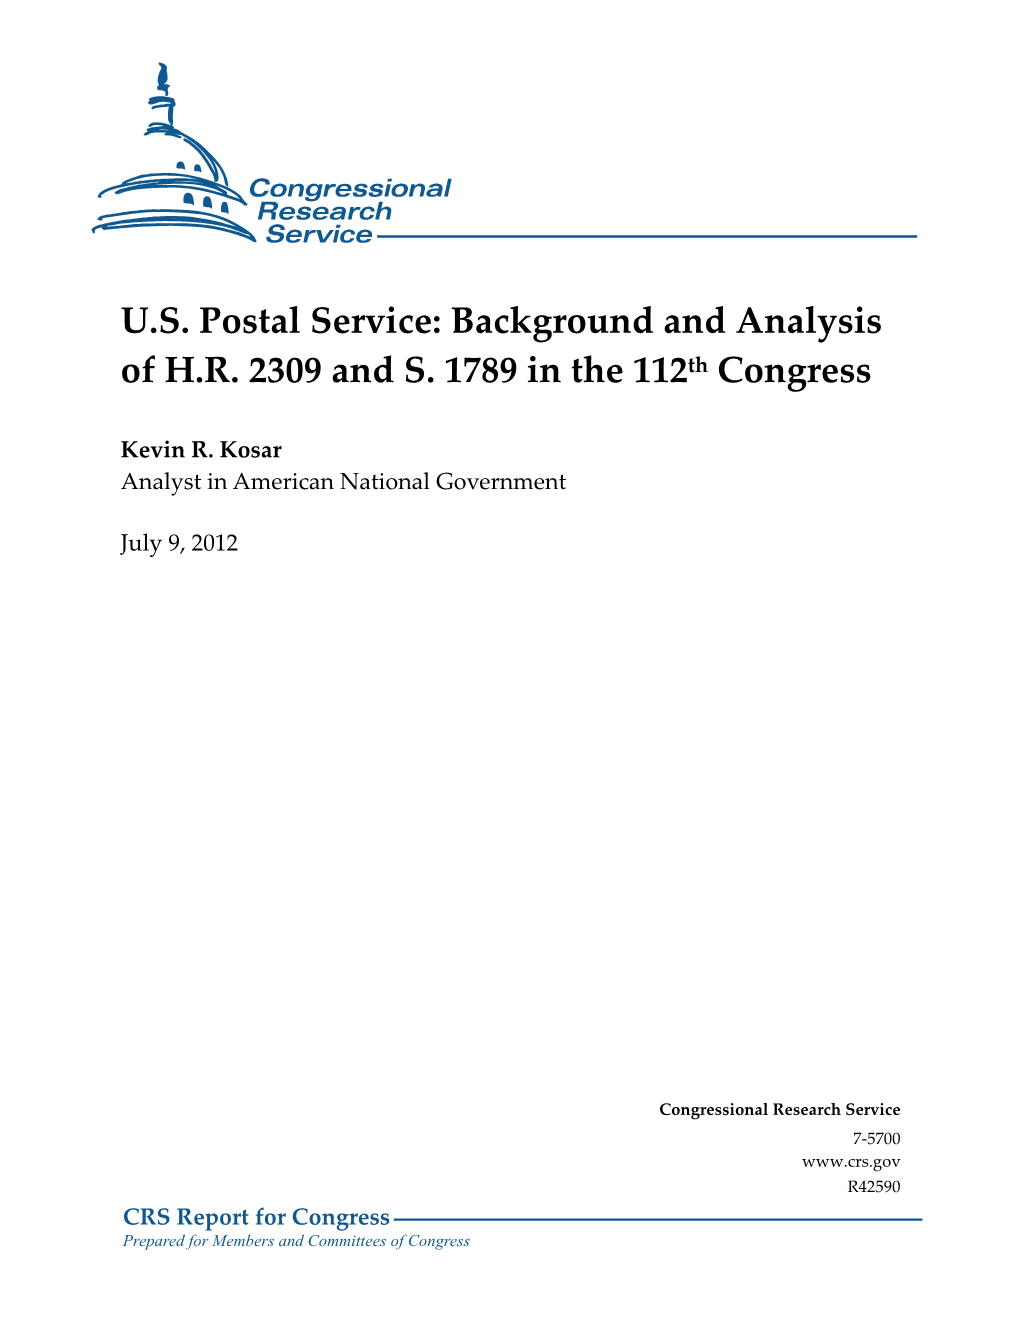 U.S. Postal Service: Background and Analysis of H.R. 2309 and S.1789